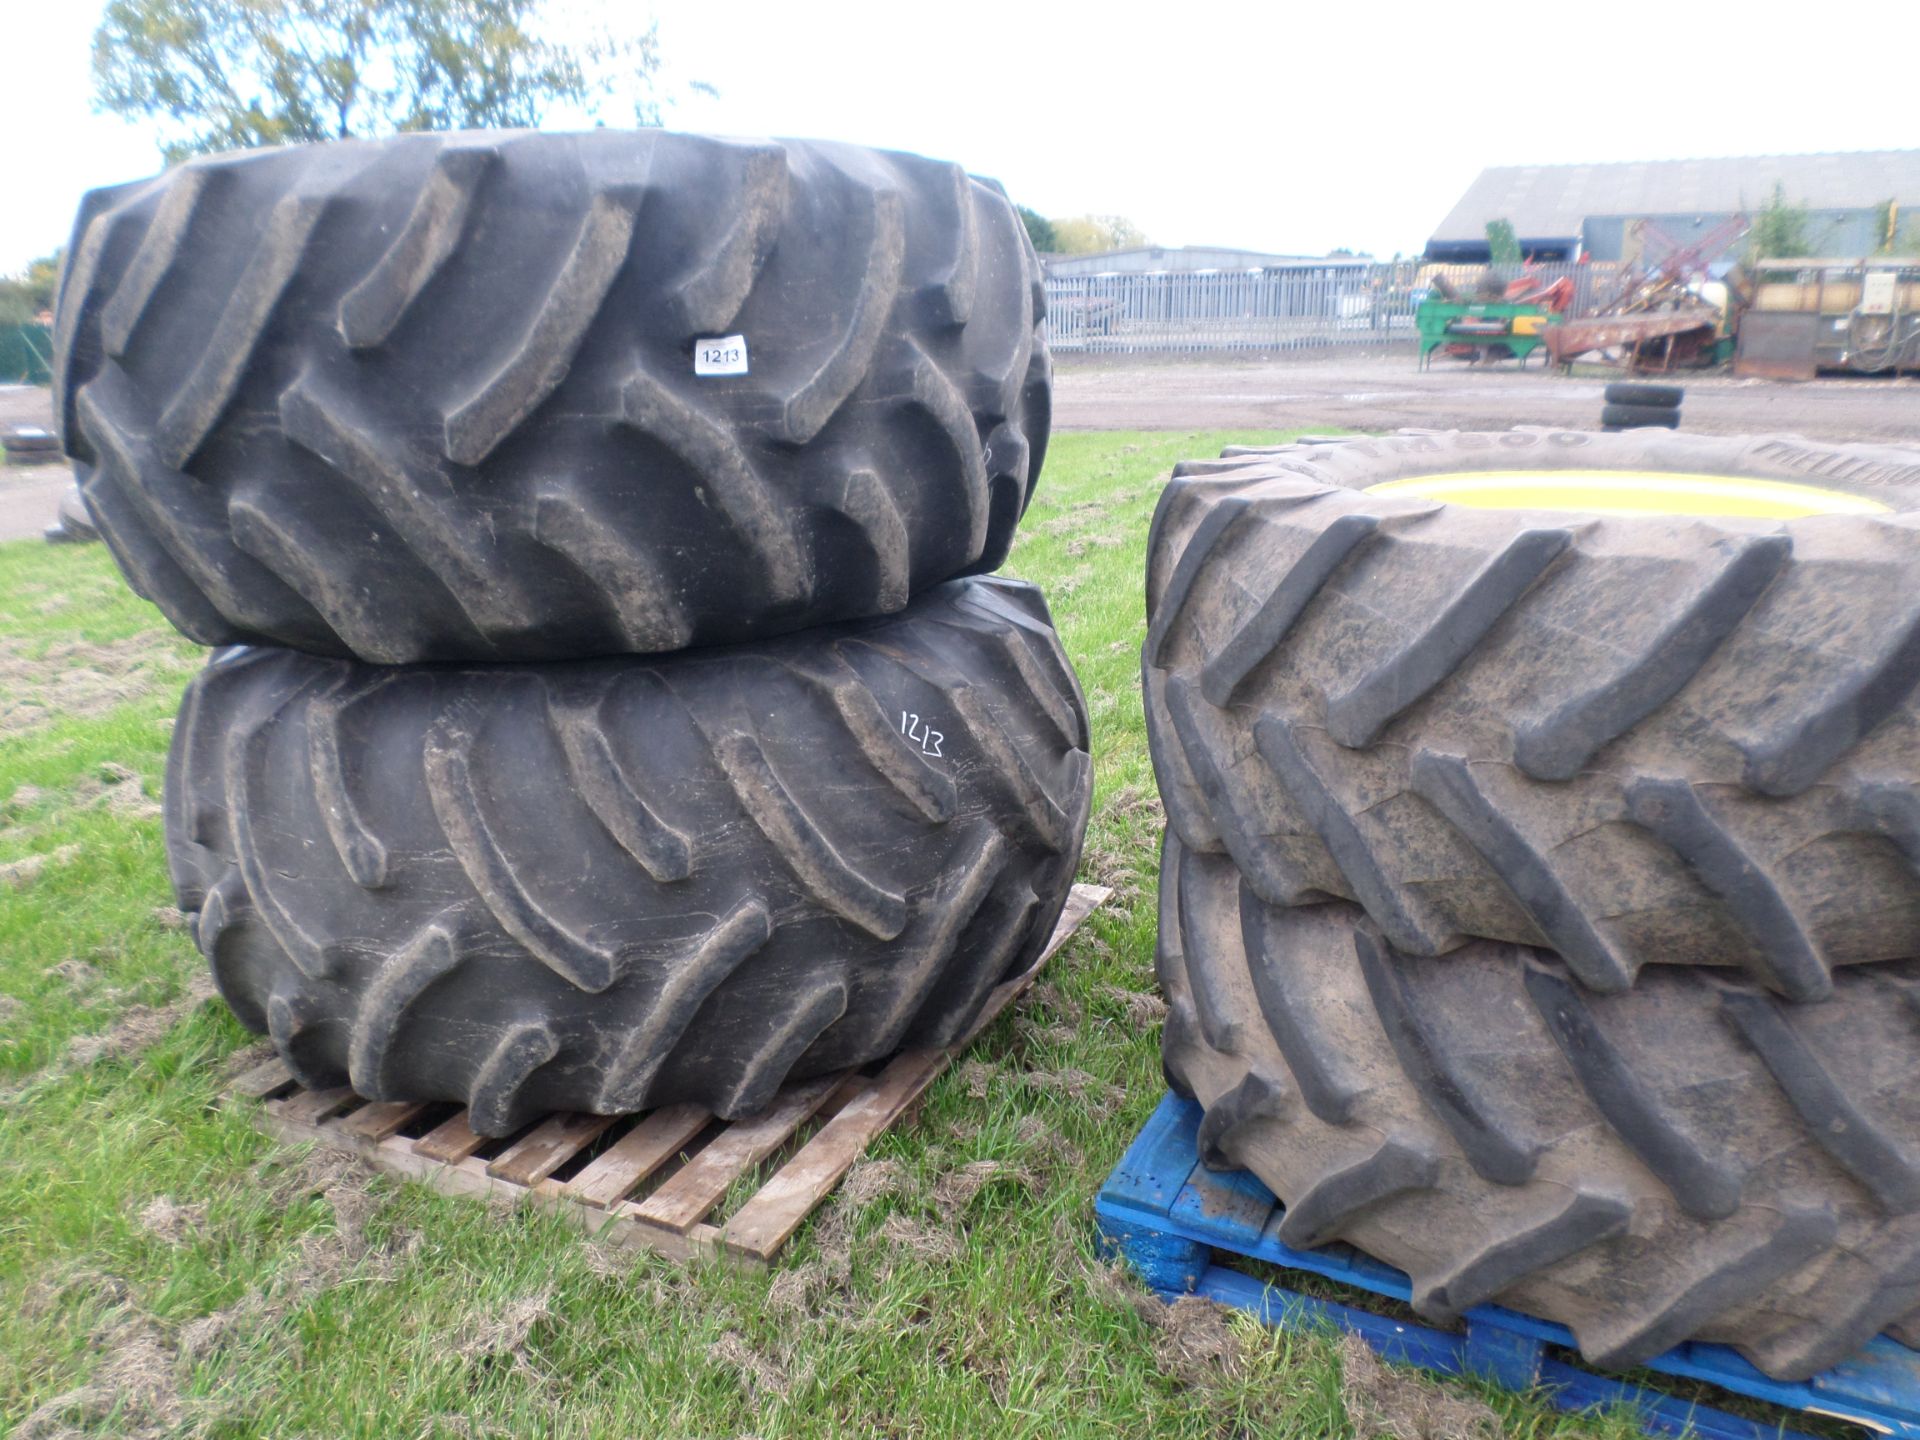 Set of 4 wheels, 800/32 rear wheels with 540/65/26 front wheels all on John Deere rims, c/w tyres - Image 2 of 3